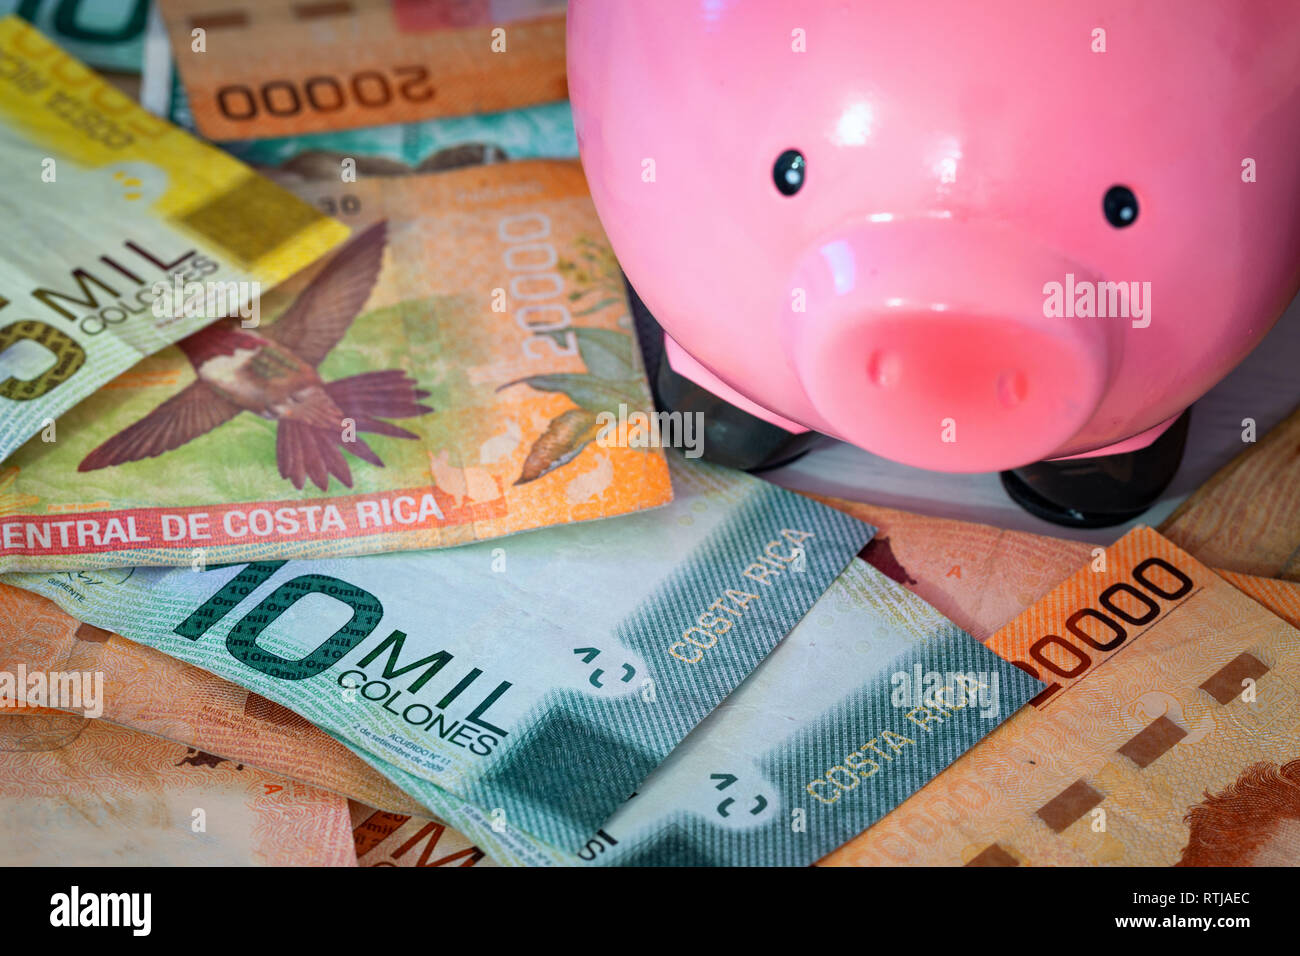 Money from Costa rica / Colones and piggy bank / saving concept Stock Photo